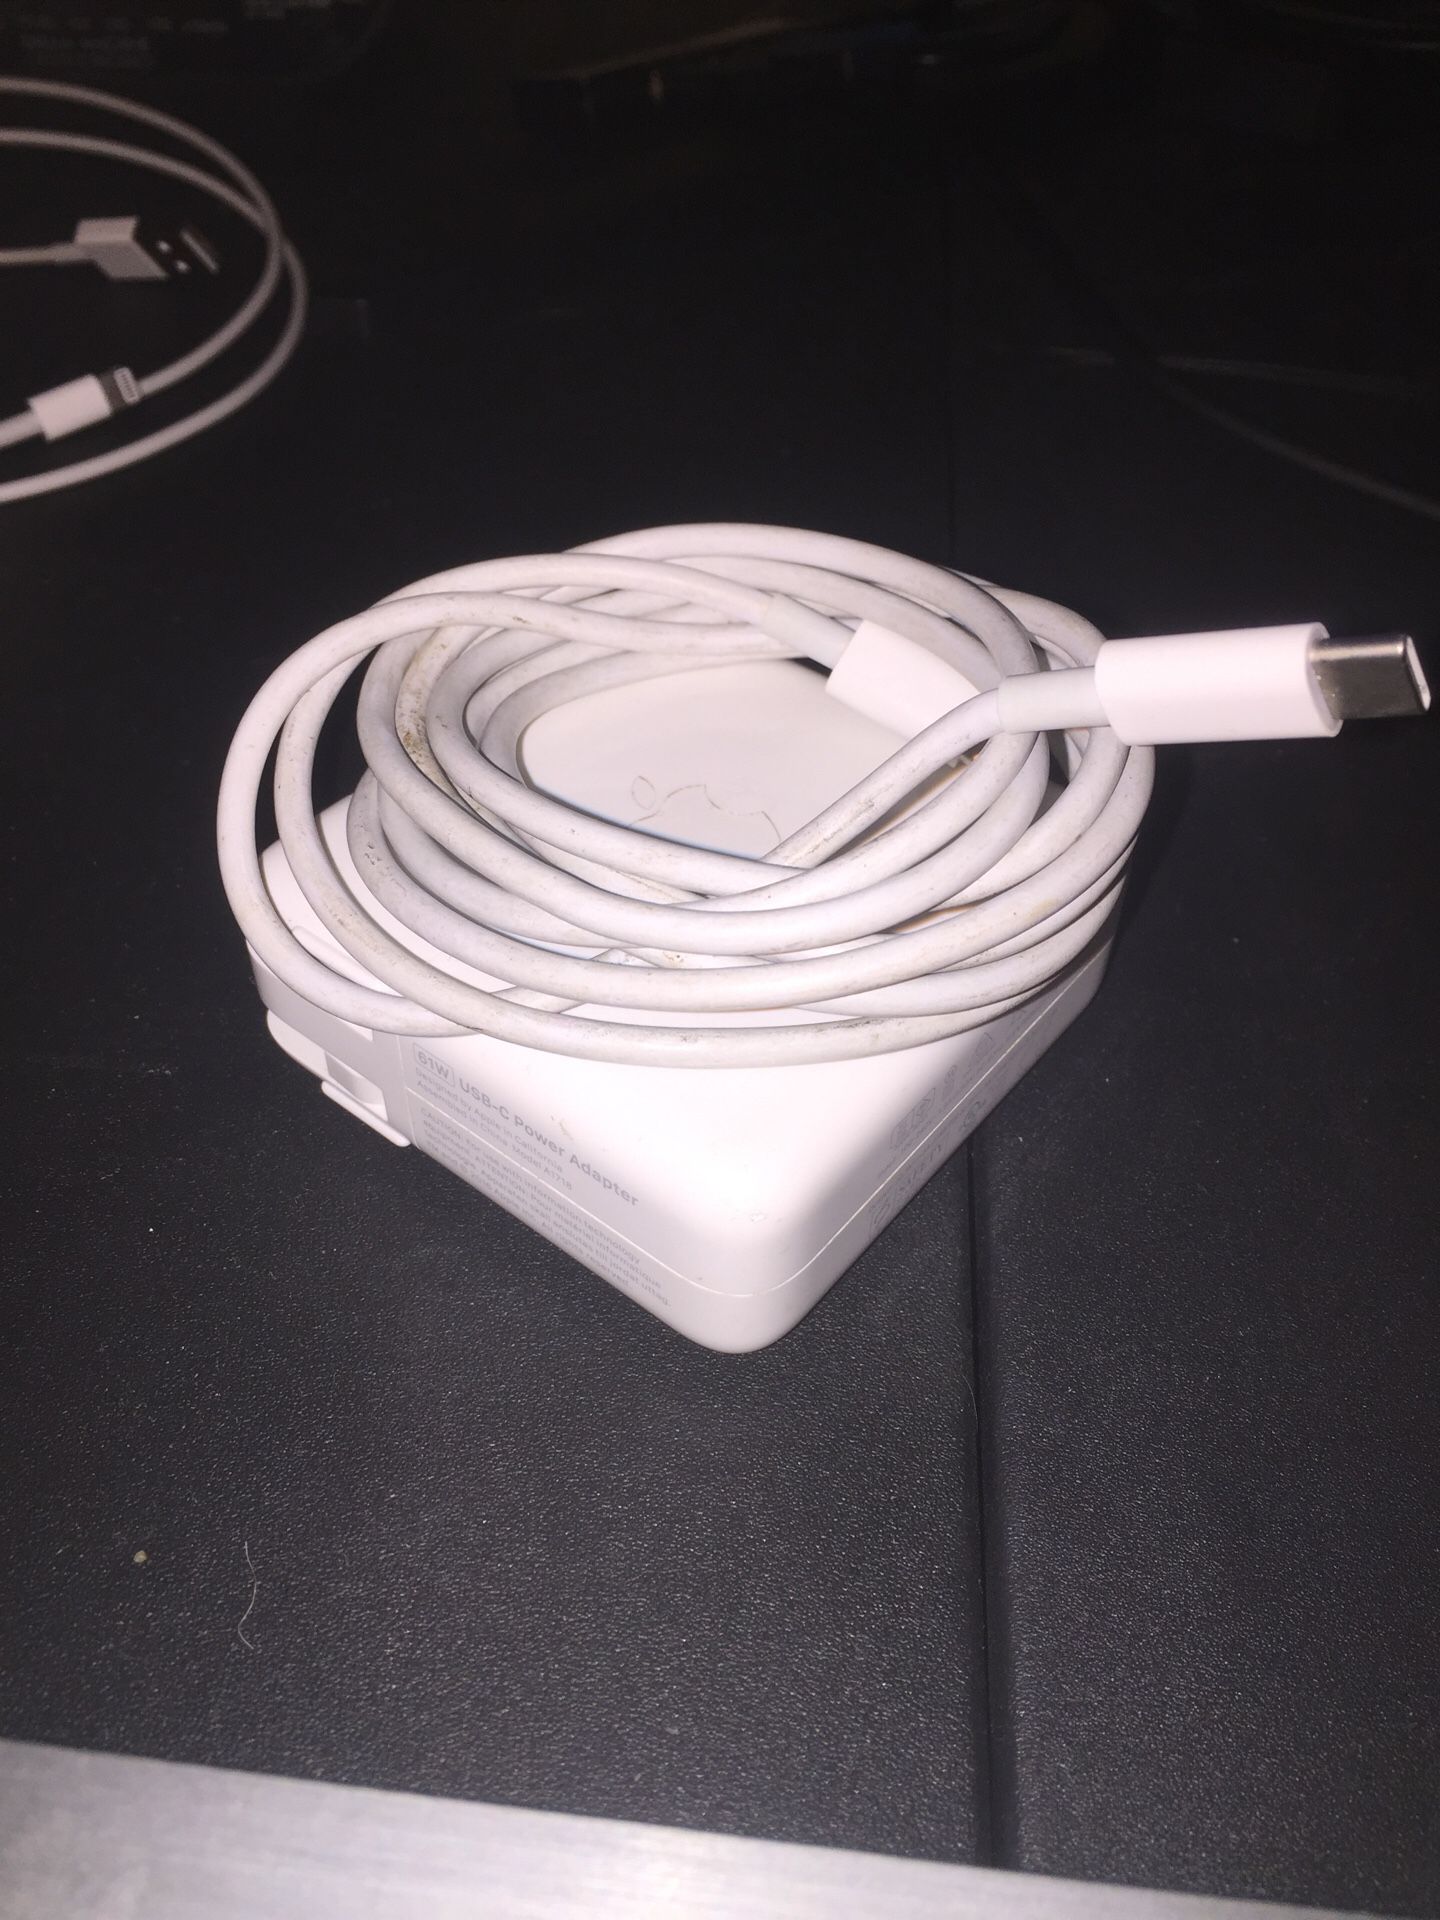 Authentic Apple 61W A1718 USB C Macbook Charger